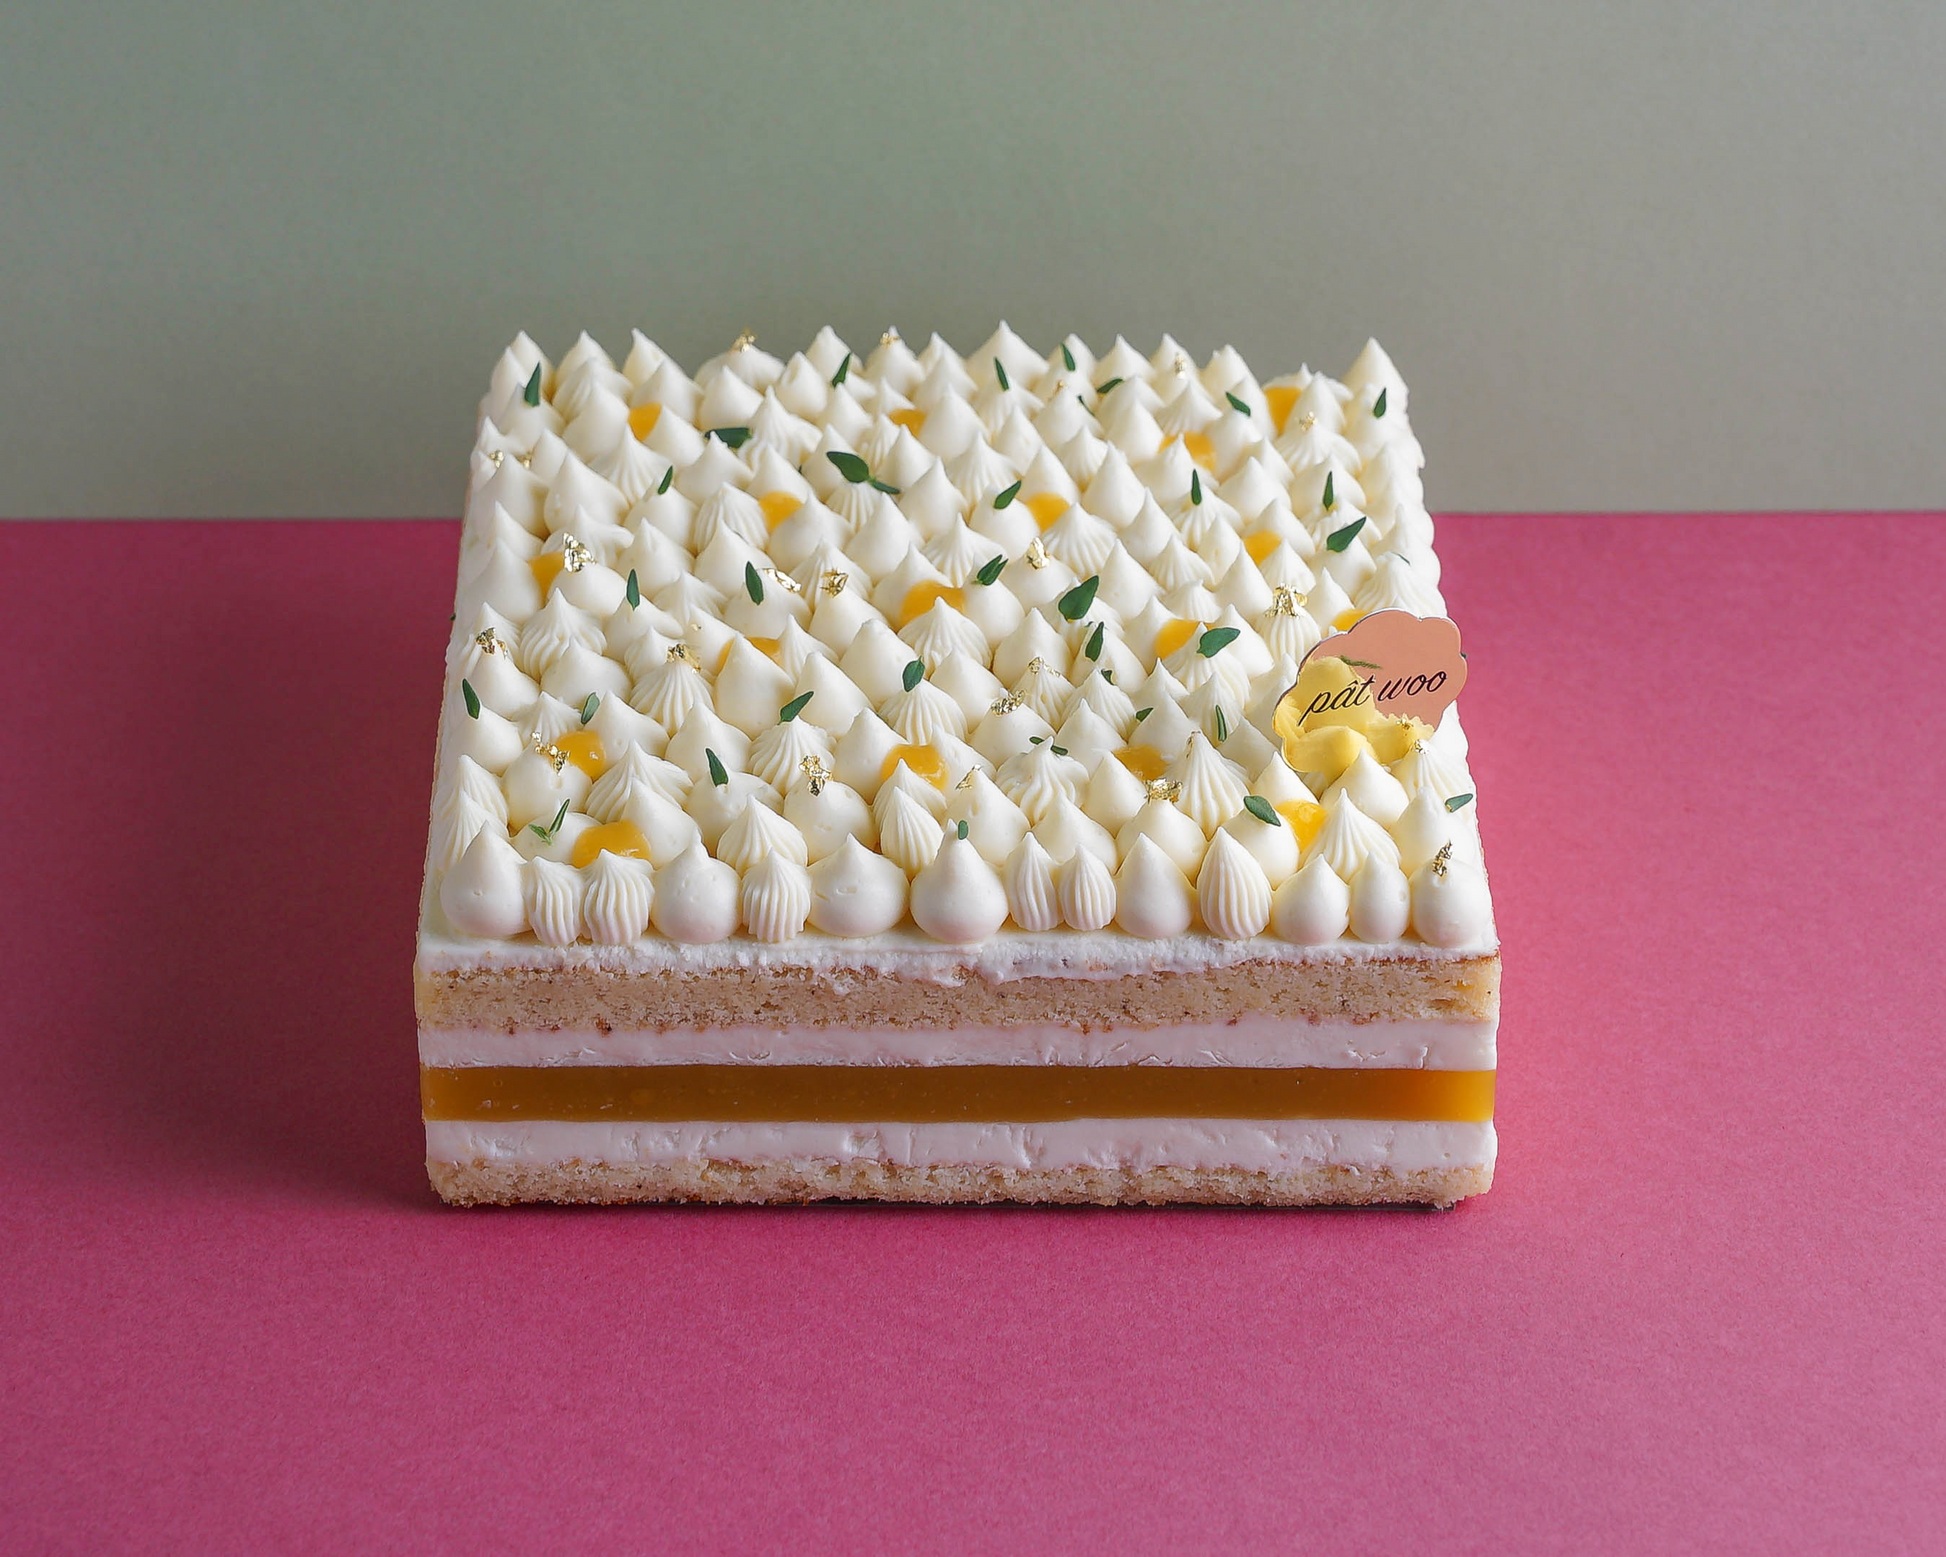 A layered mousse cake topped with whipped cream, mango jelly and gold foil decorations. This tropical delight features layers of light sponge cake infused with Koichi yuzu — known for their aromatic zest and tart flavour, and is also filled with fresh mango jelly. The tanginess of the yuzu complements well with the sweeter flavour of the mango, making this a popular choice among the adults and the elderly. 